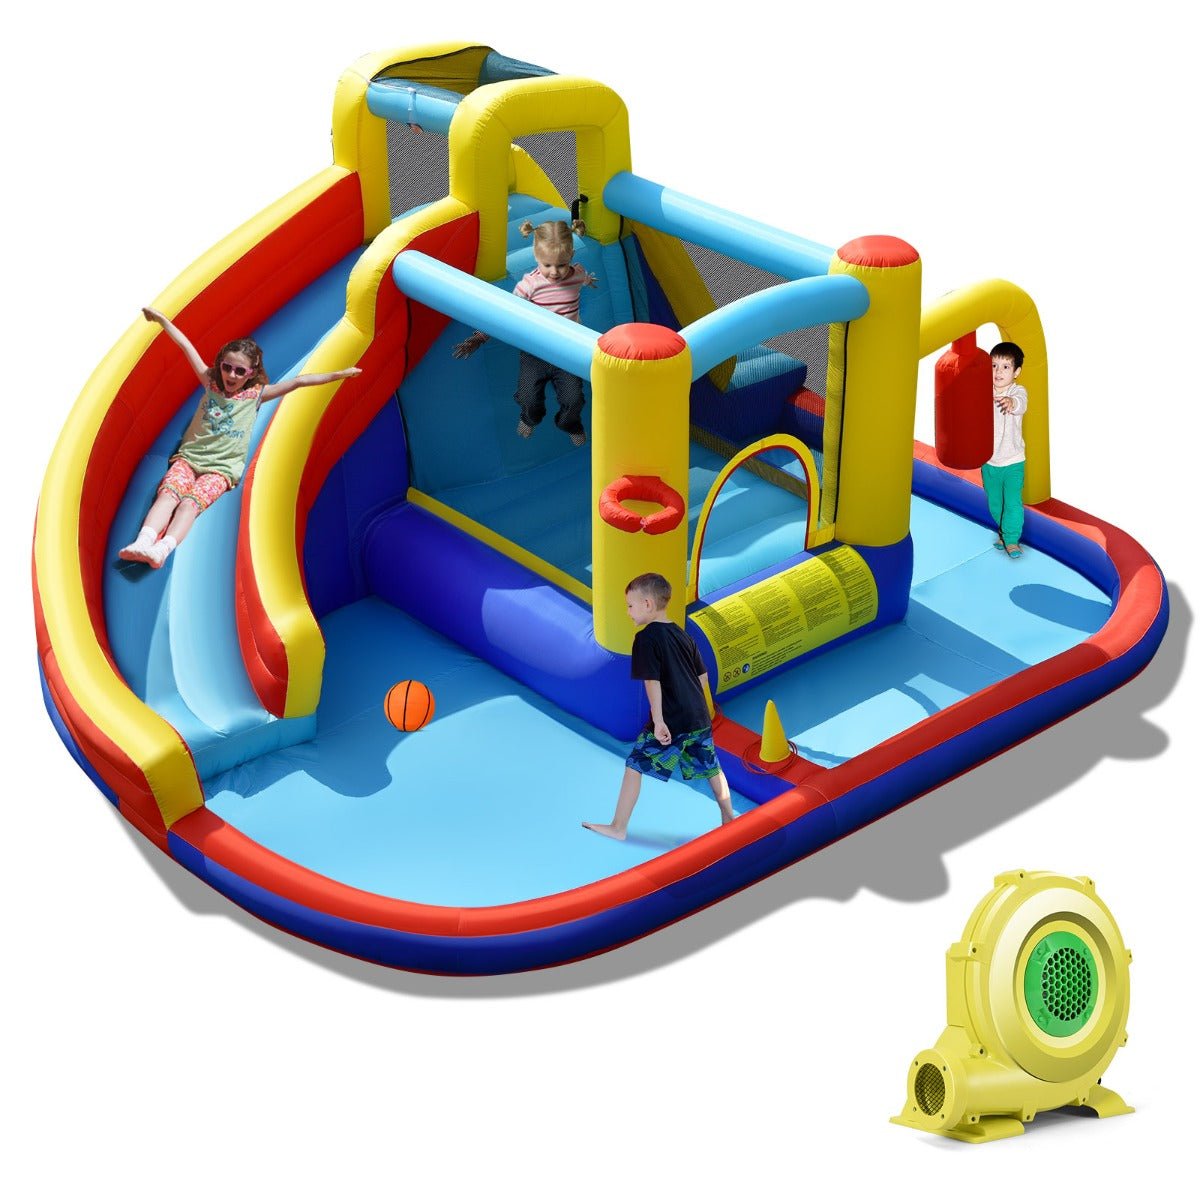 Curvy Slide Inflatable Fun Palace